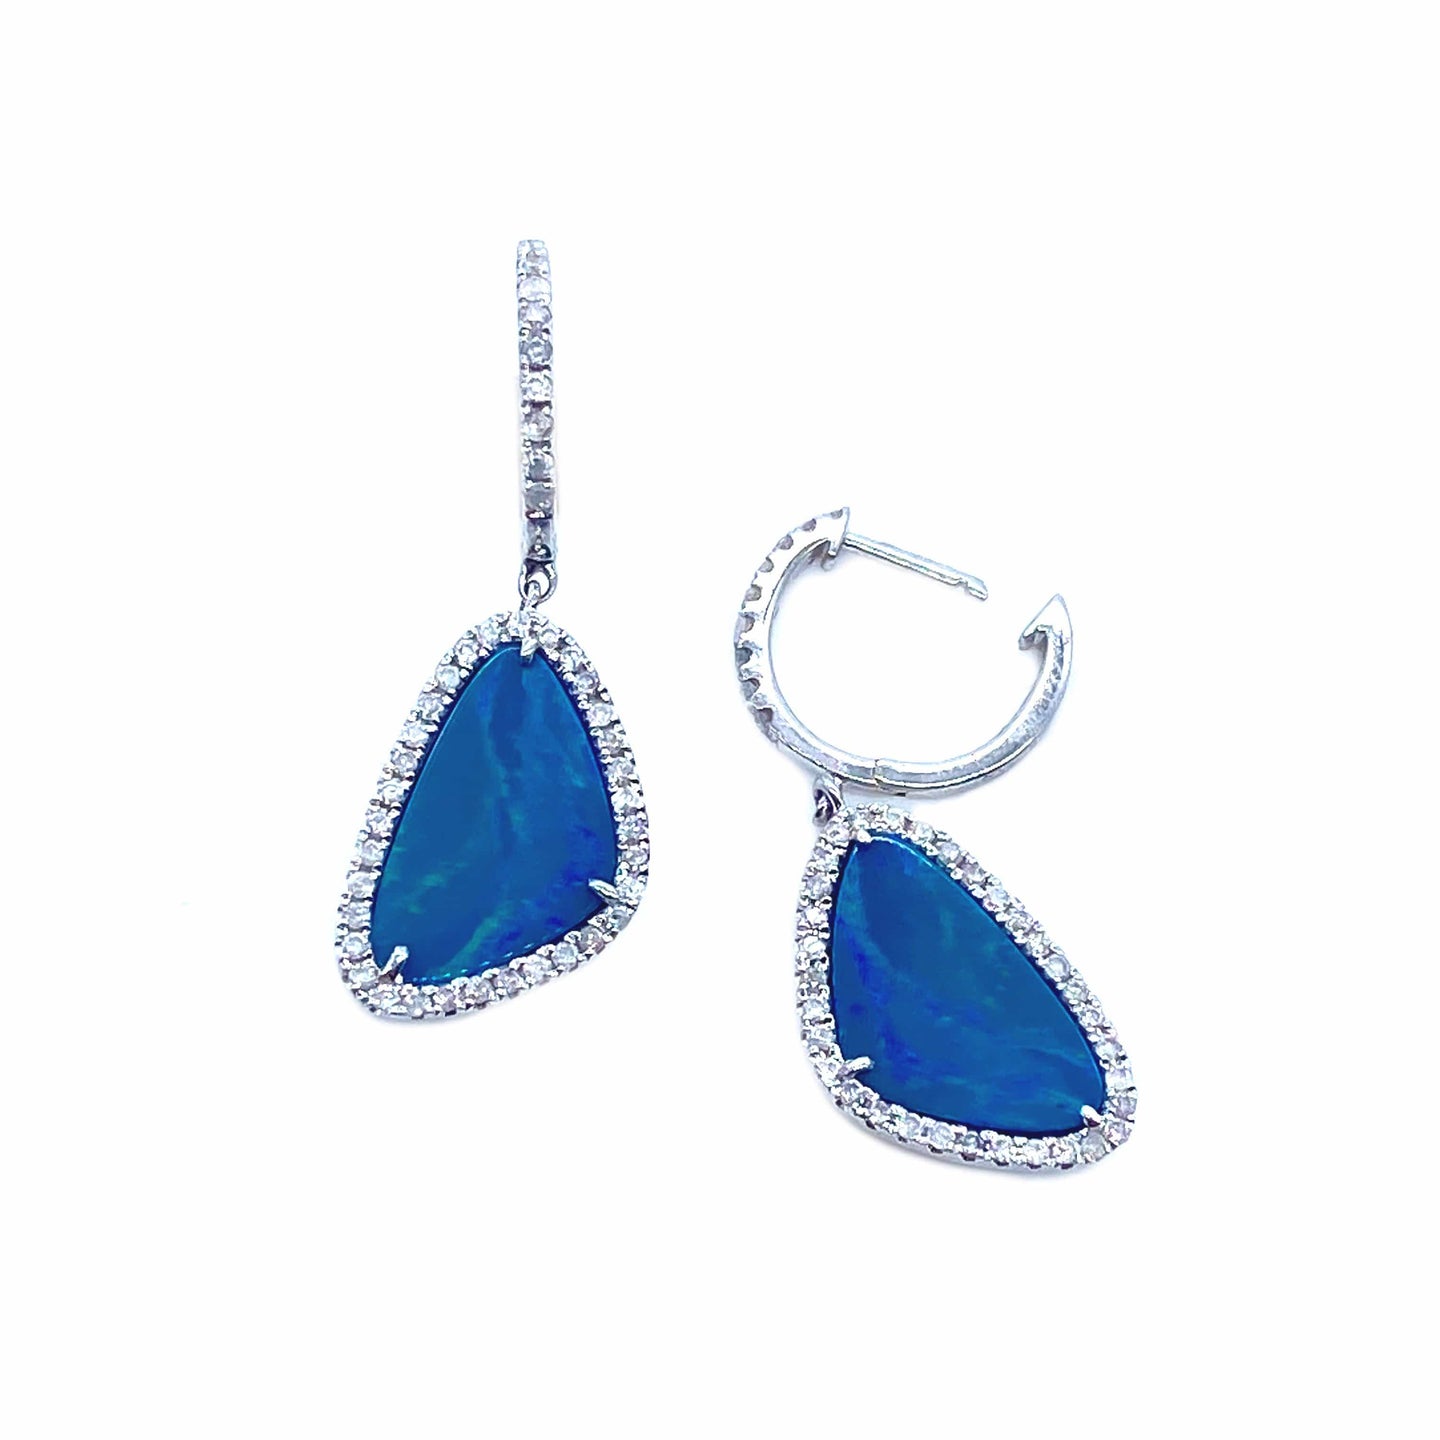 Trinity White Gold with Diamonds and Opal Earrings - Coomi